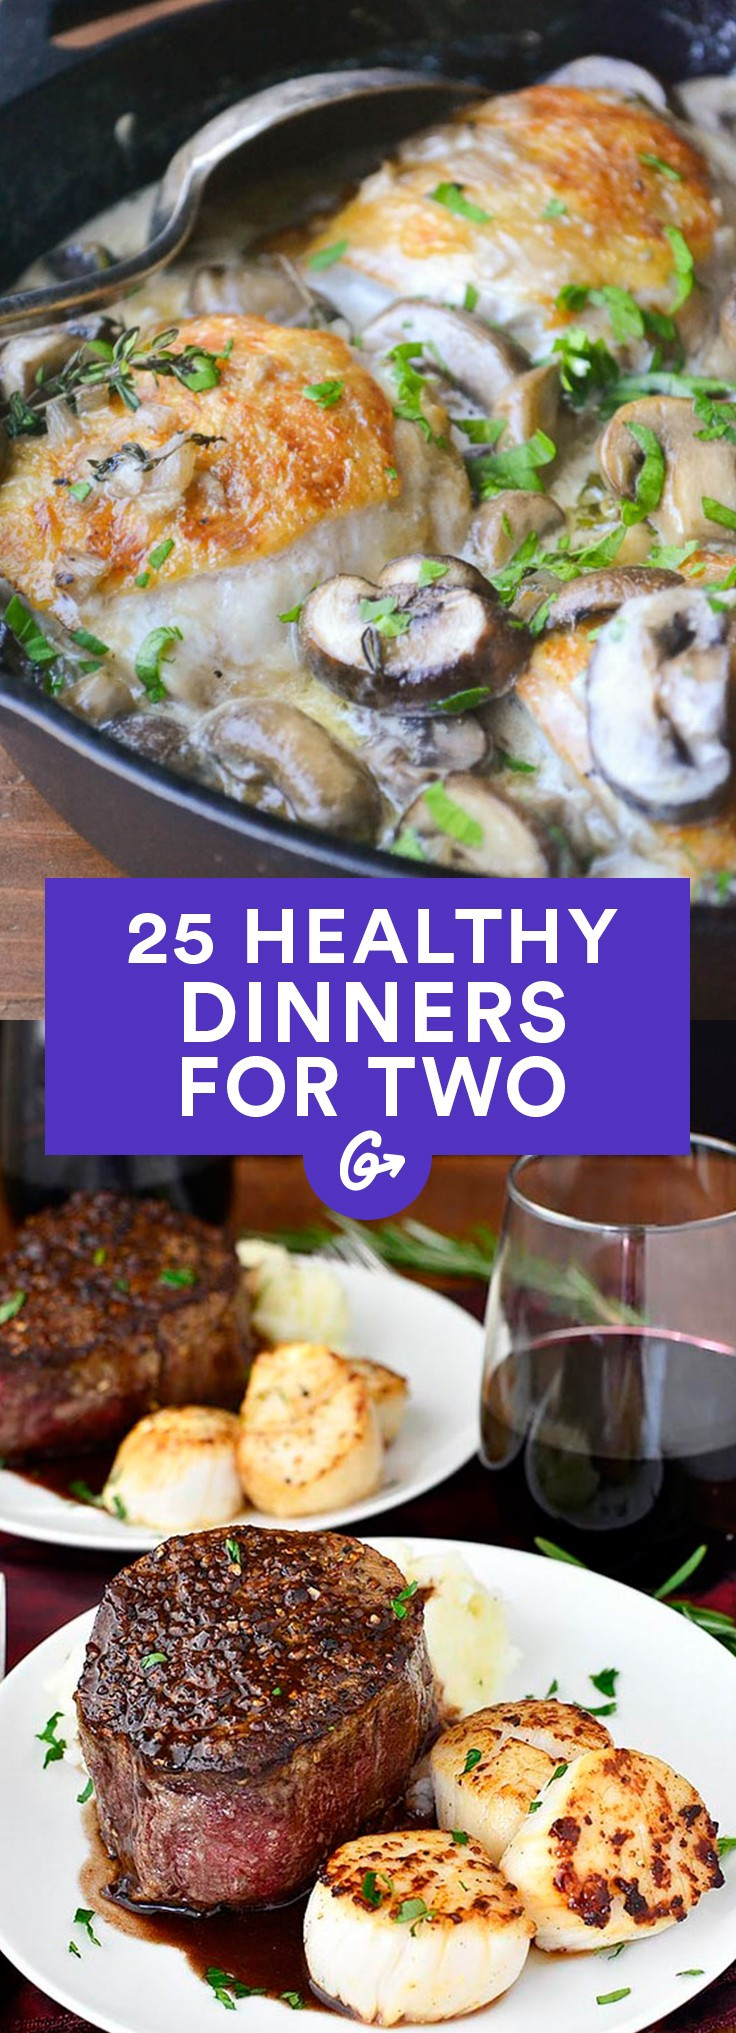 Great Dinners For Two
 Healthy Dinner Recipes for Two